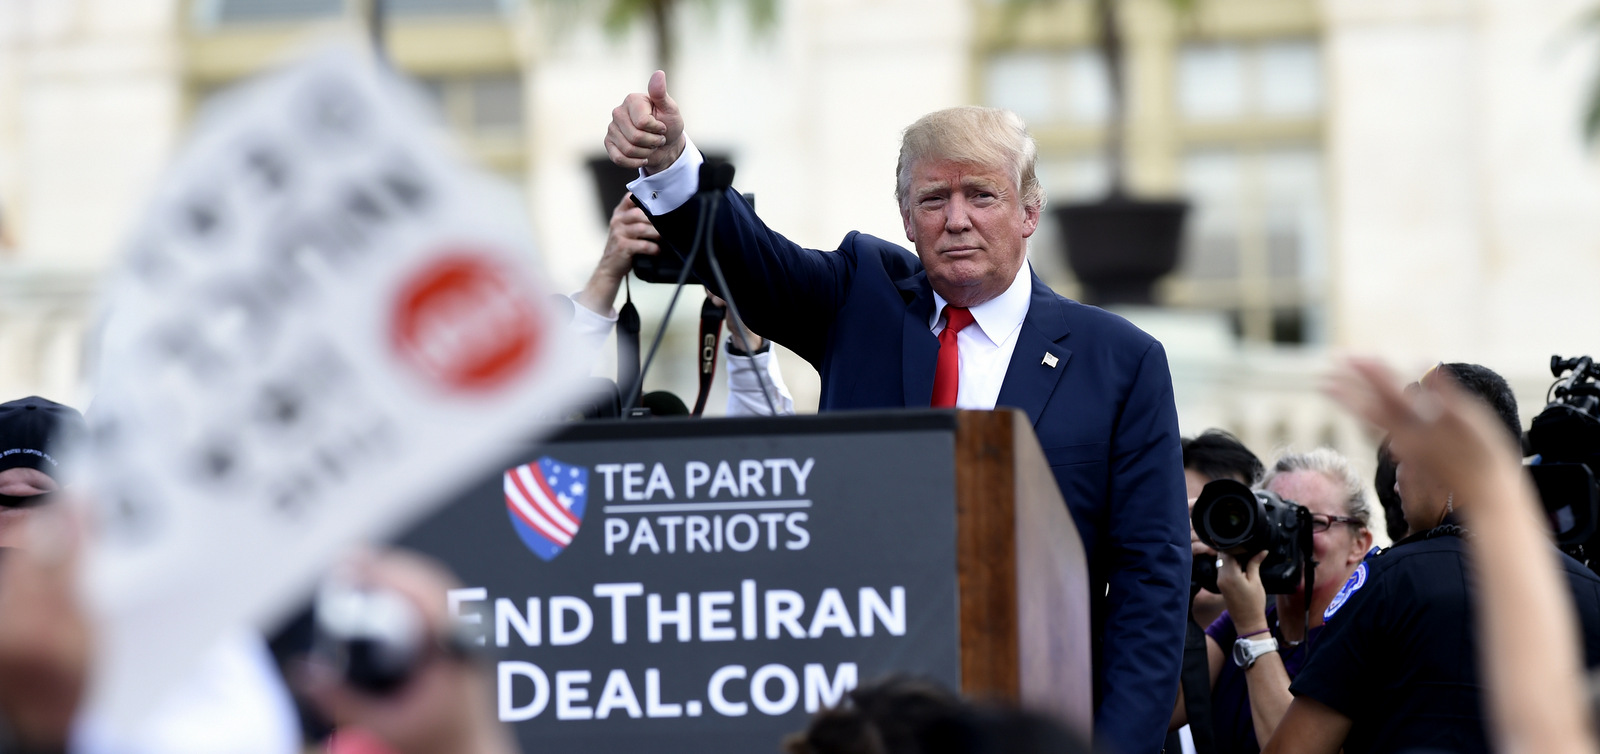 Republican Presidential candidate Donald Trump gives a thumbs up to the crowd after speaking during a rally opposing the Iran nuclear deal outside the Capitol in Washington, Wednesday, Sept. 9, 2015. (AP/Susan Walsh)